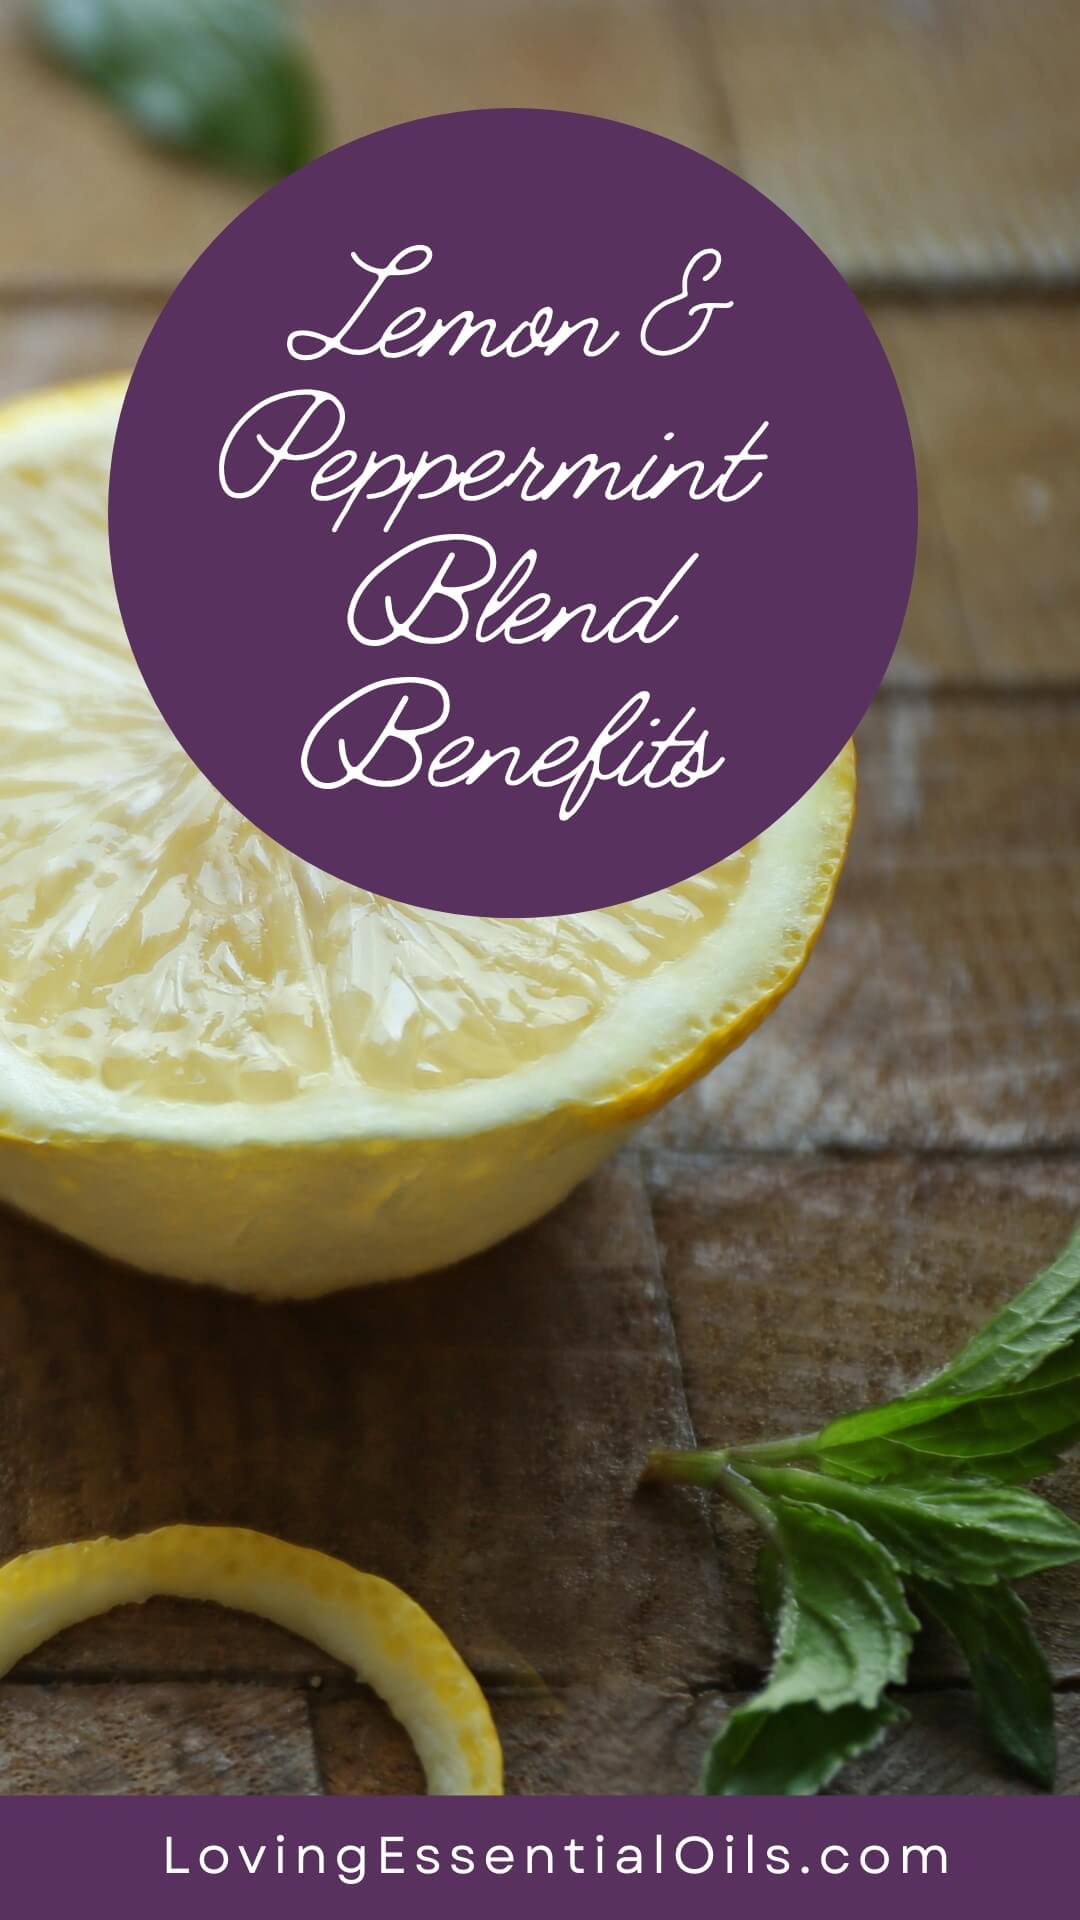 Lemon and Peppermint Blend Benefits by Loving Essential Oils